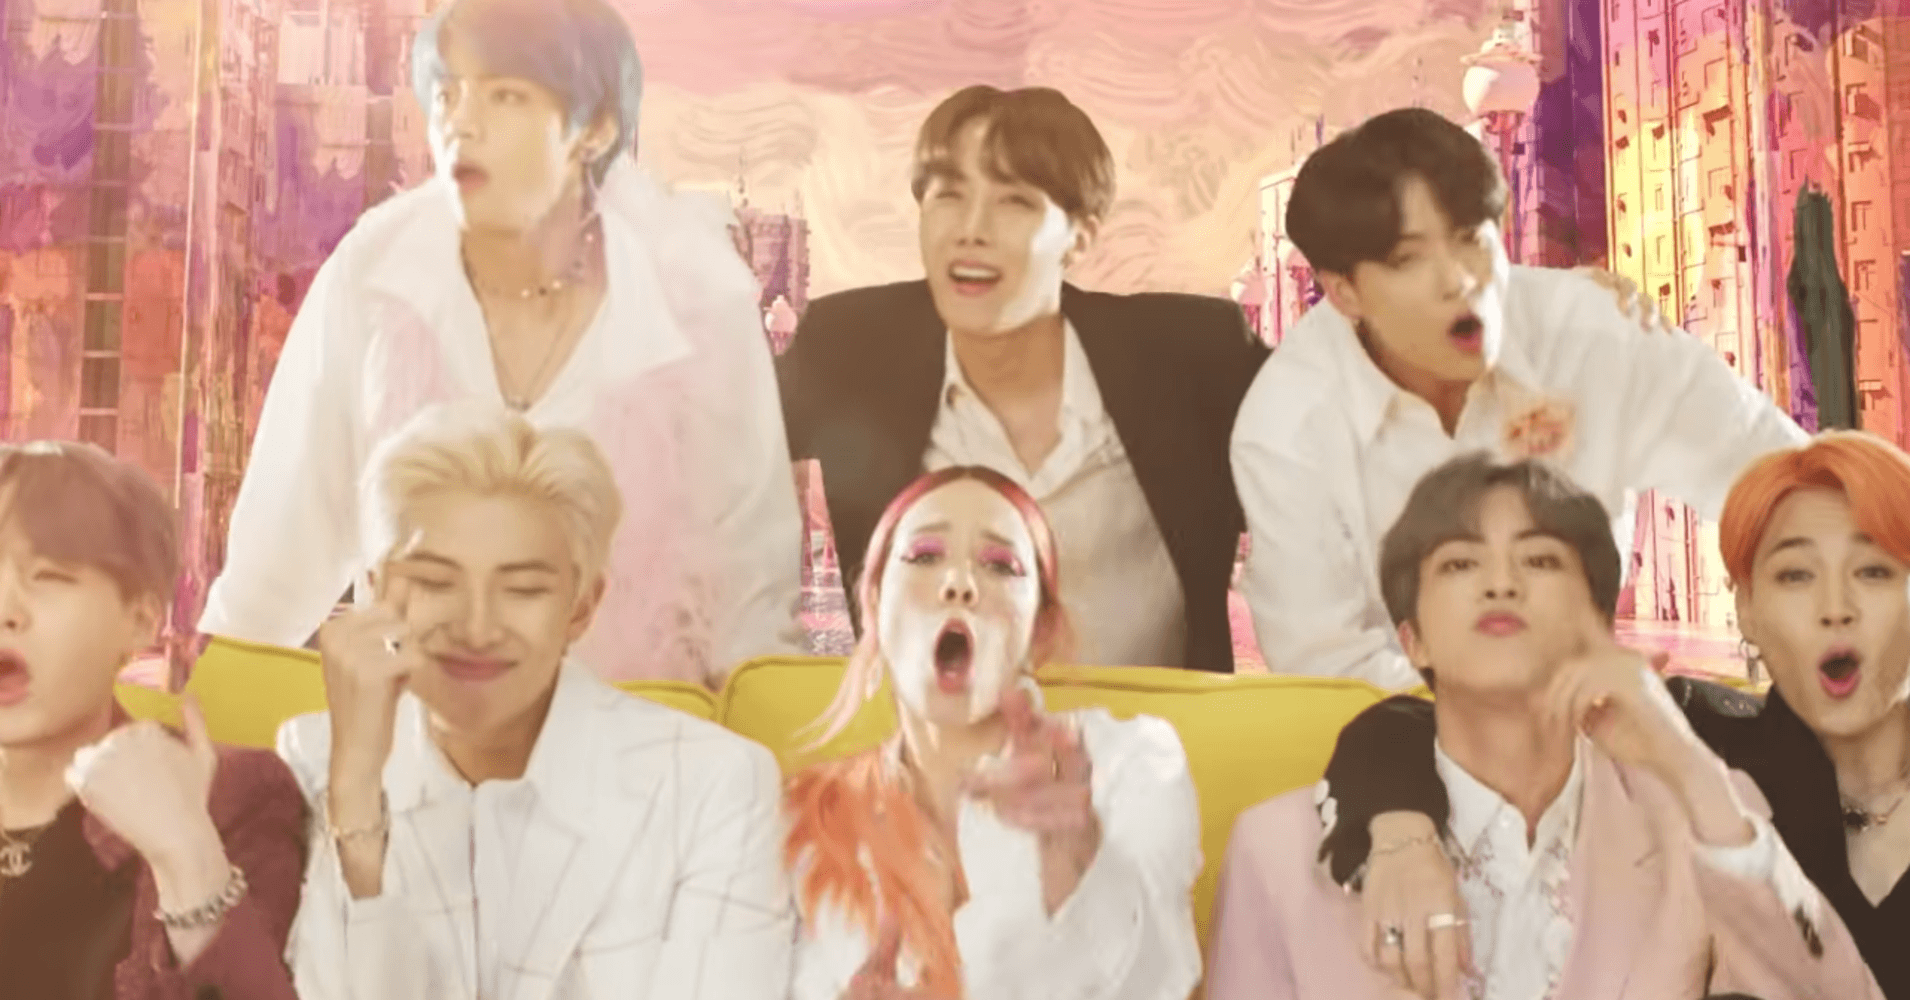 BTS, Halsey Team Up In Candy Hued New Video For 'Boy With Luv